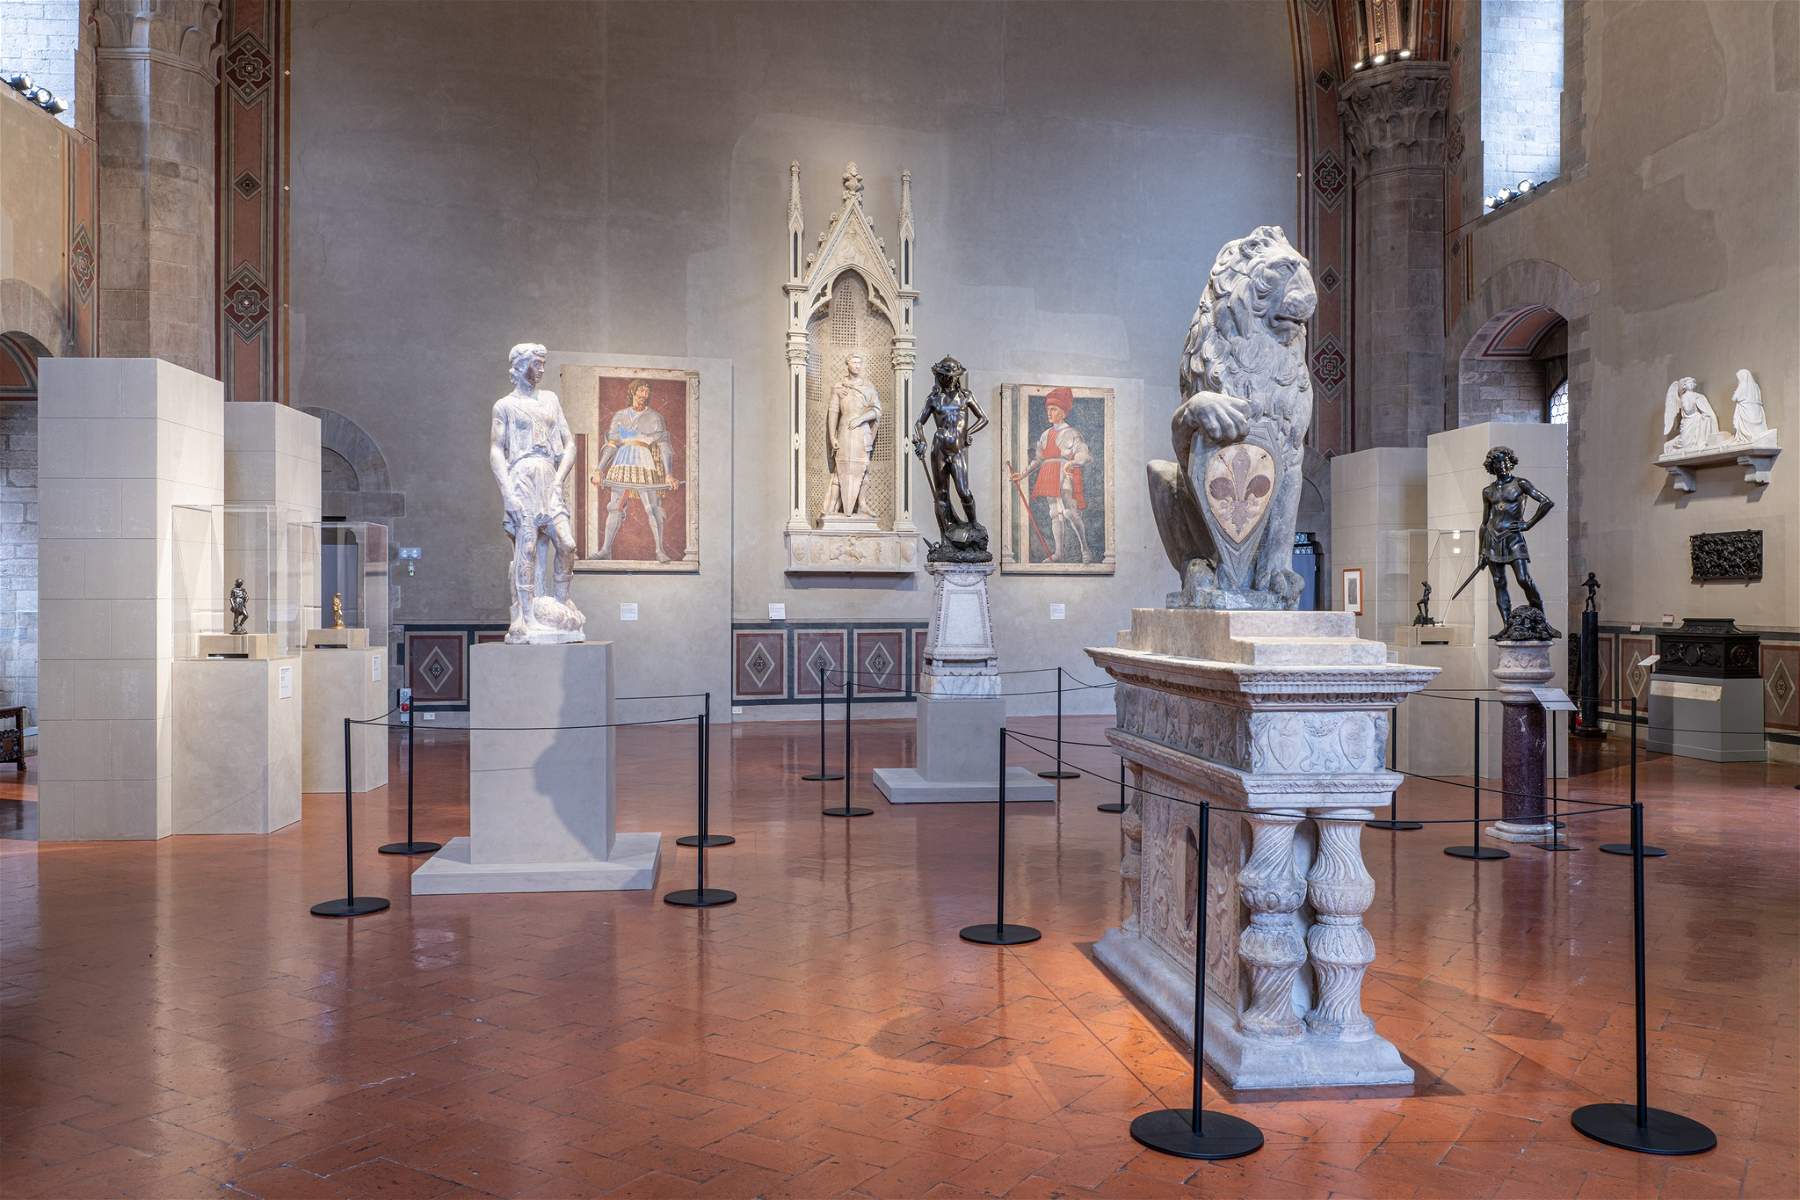 Donatello exhibition exceeds 100,000 visitors. And a book on his works in Tuscany comes out